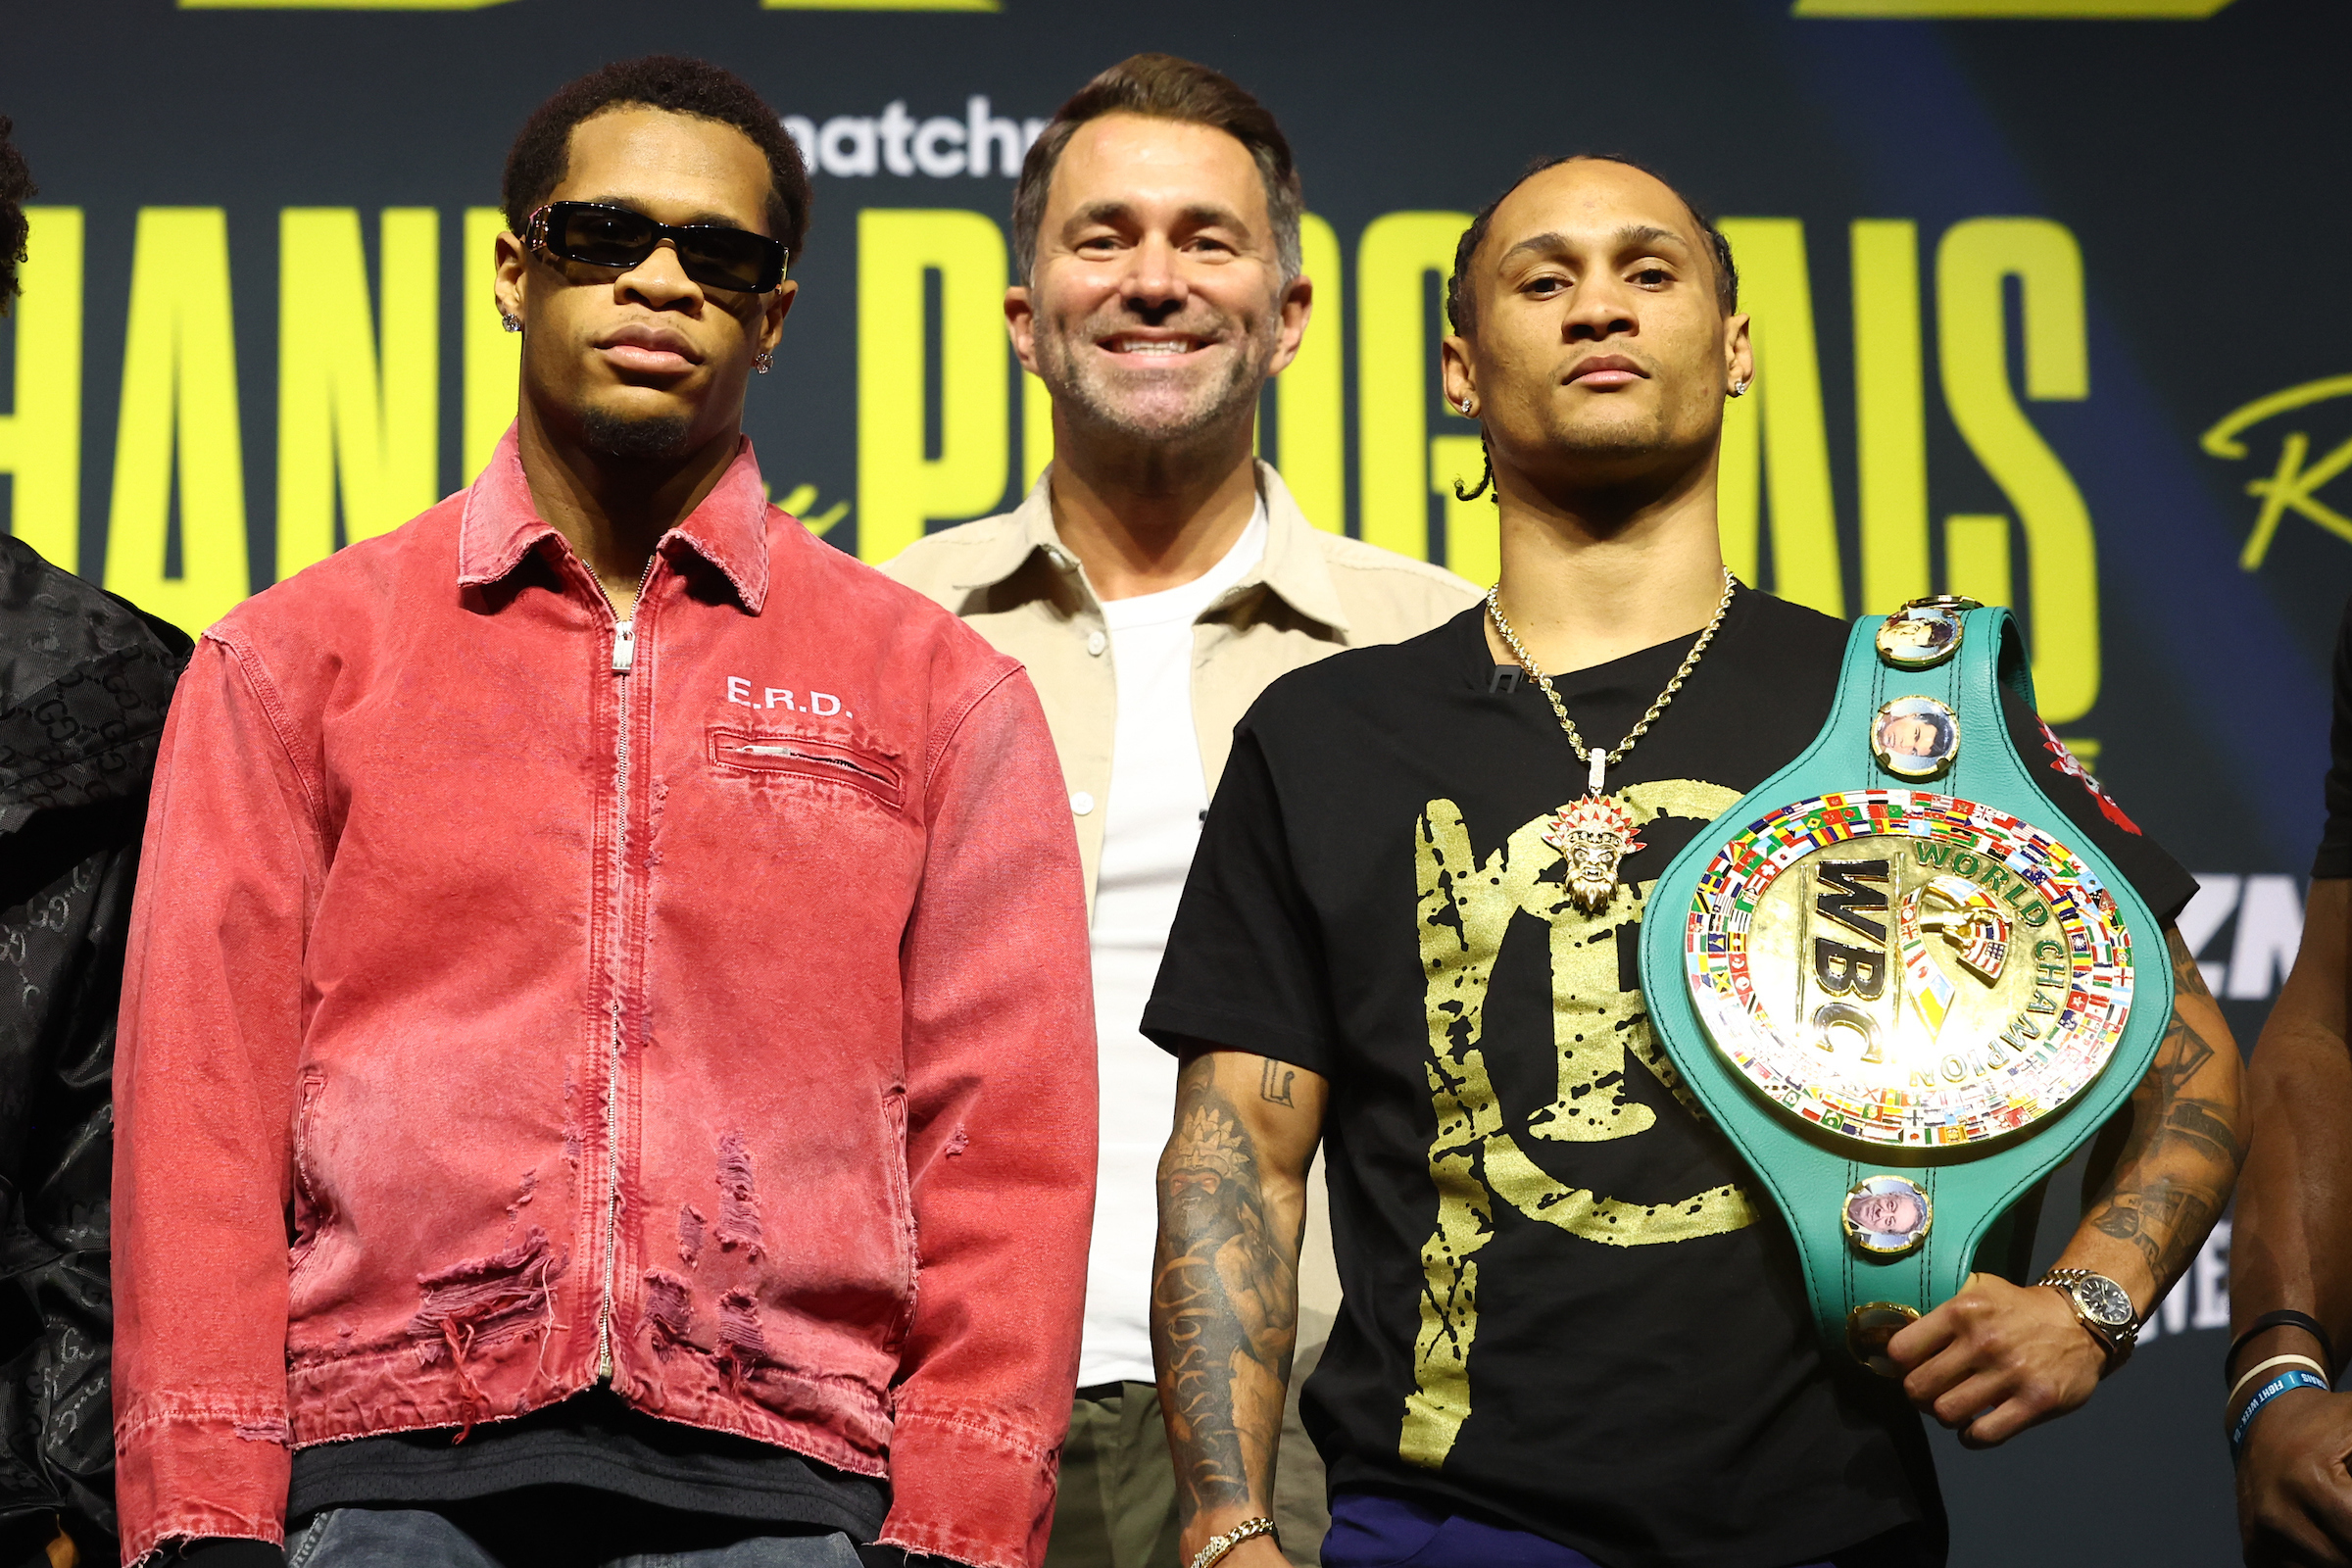 Haney vs. Prograis: Running Order, Weigh-In Results & Betting Odds